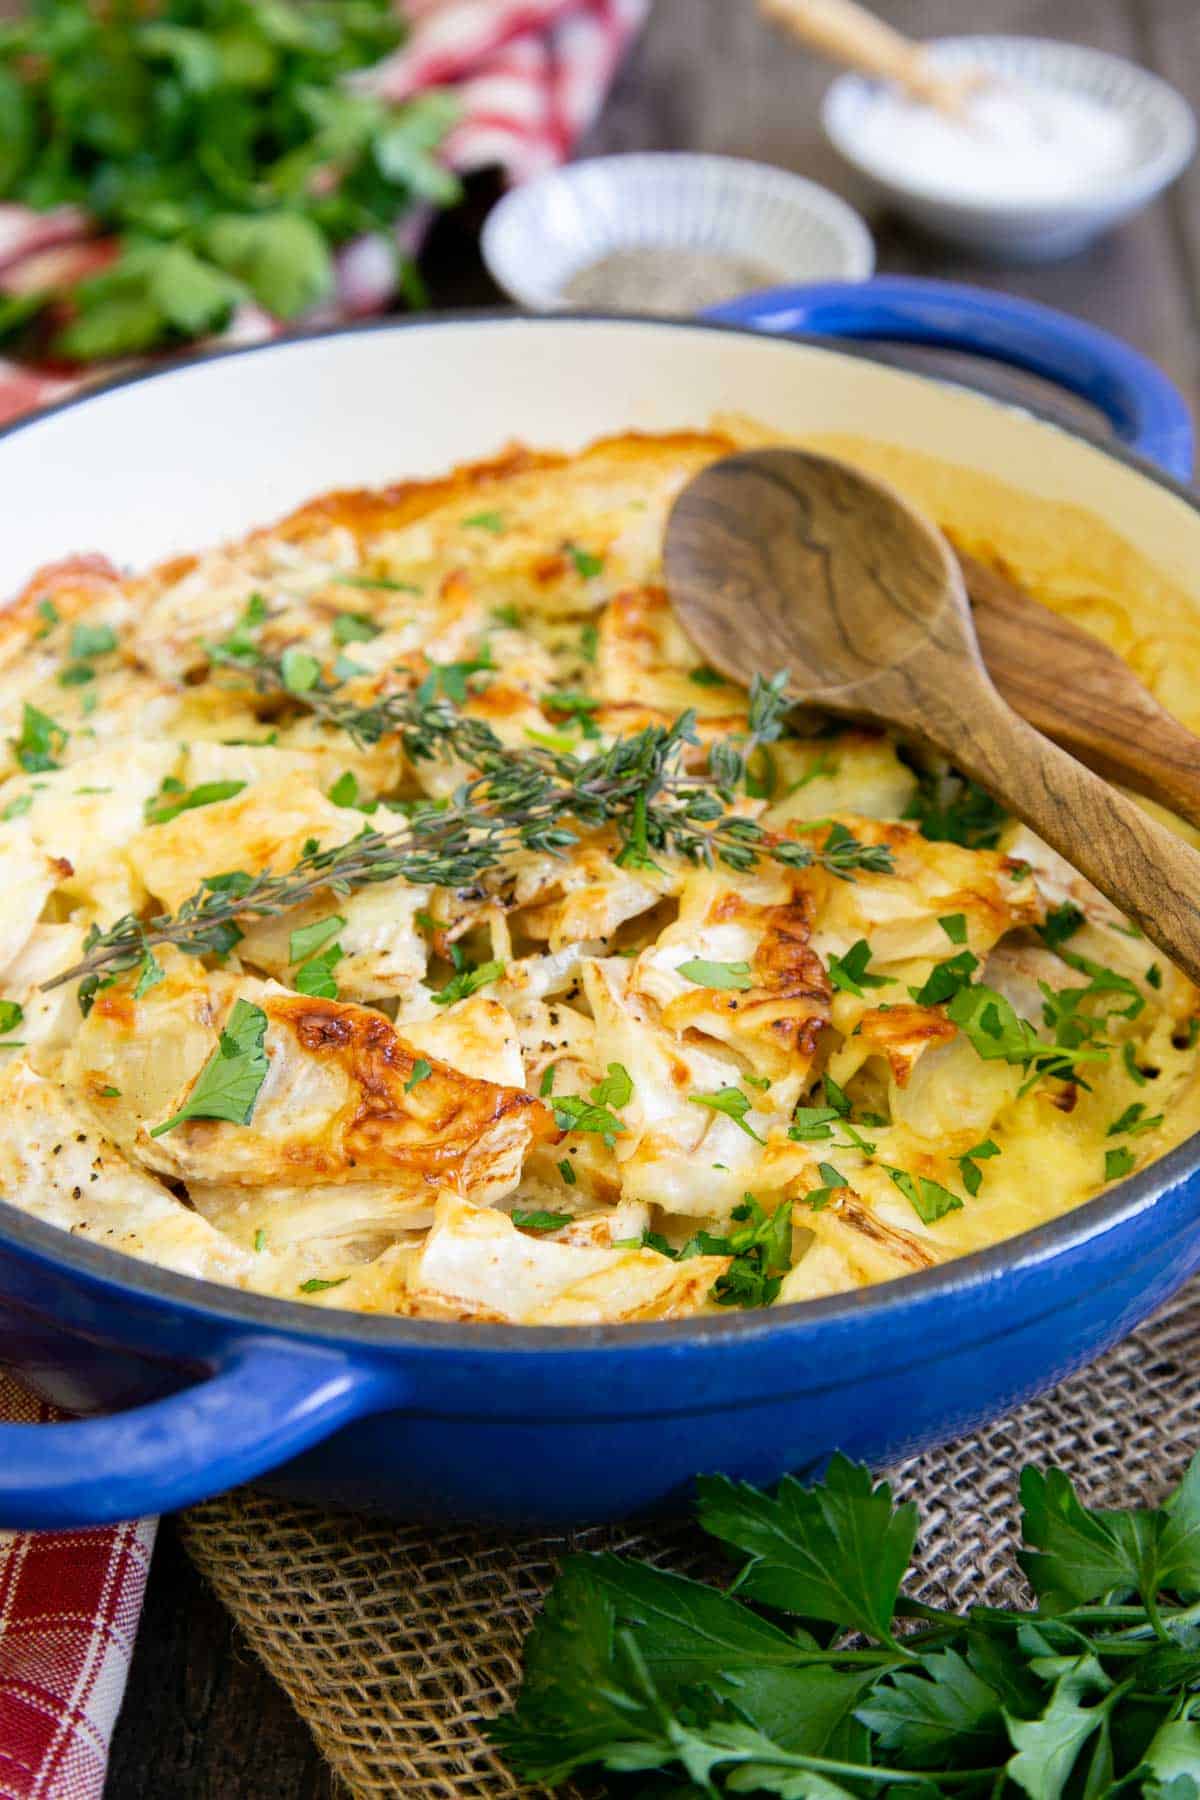 Tempting celeriac gratin in a blue stoneware serving dish, golden on the top and scattered with fresh parsley and sprigs of thyme.